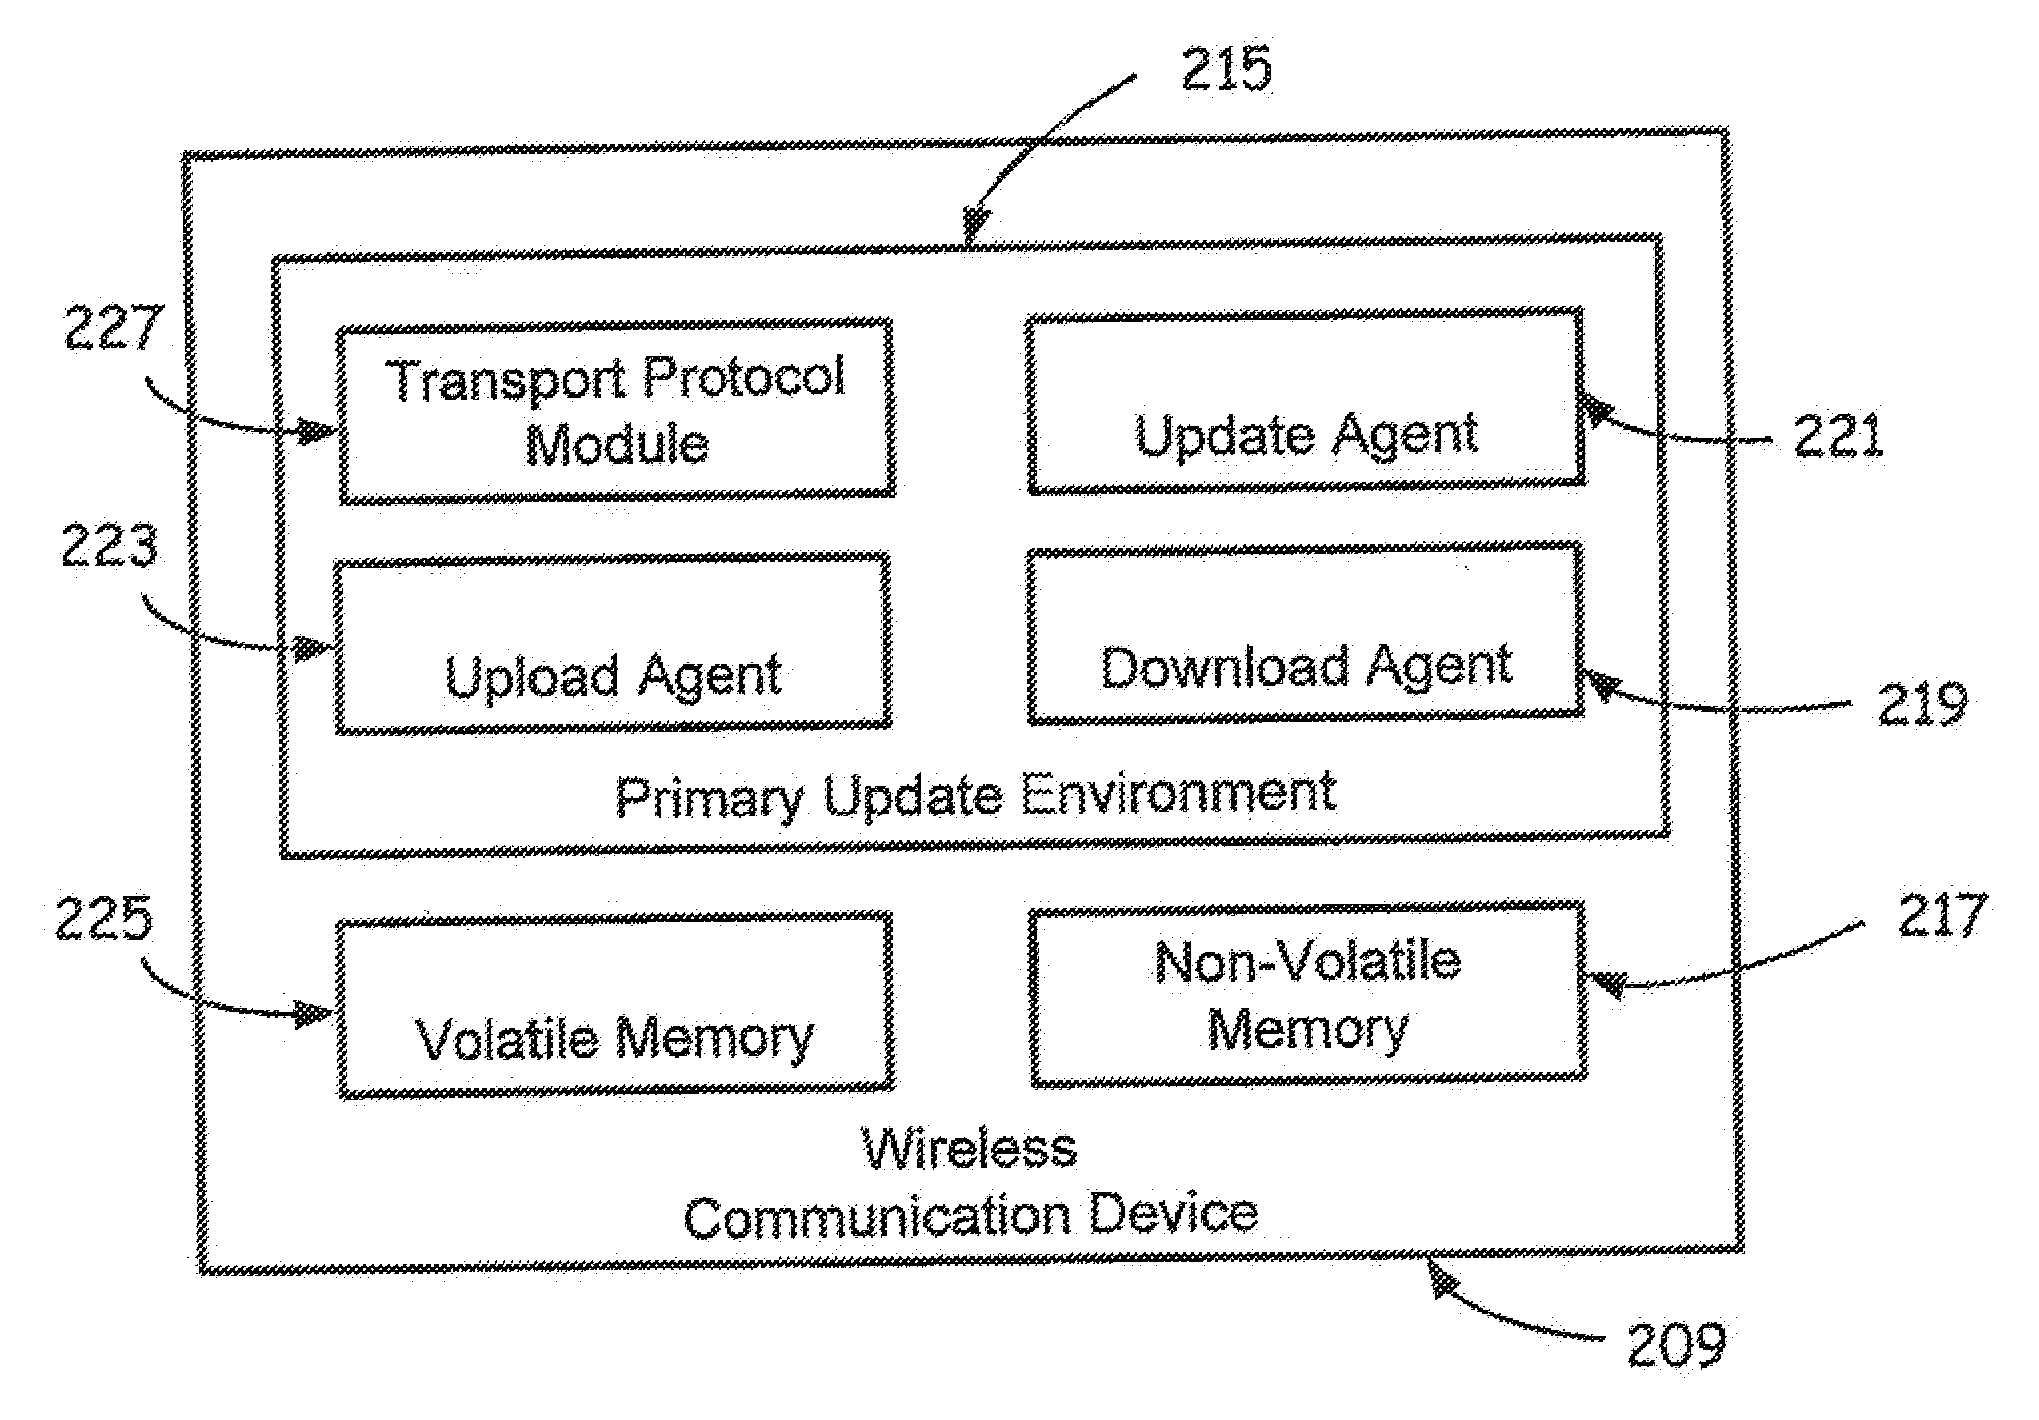 Network for updating firmware and / or software in wireless communication devices